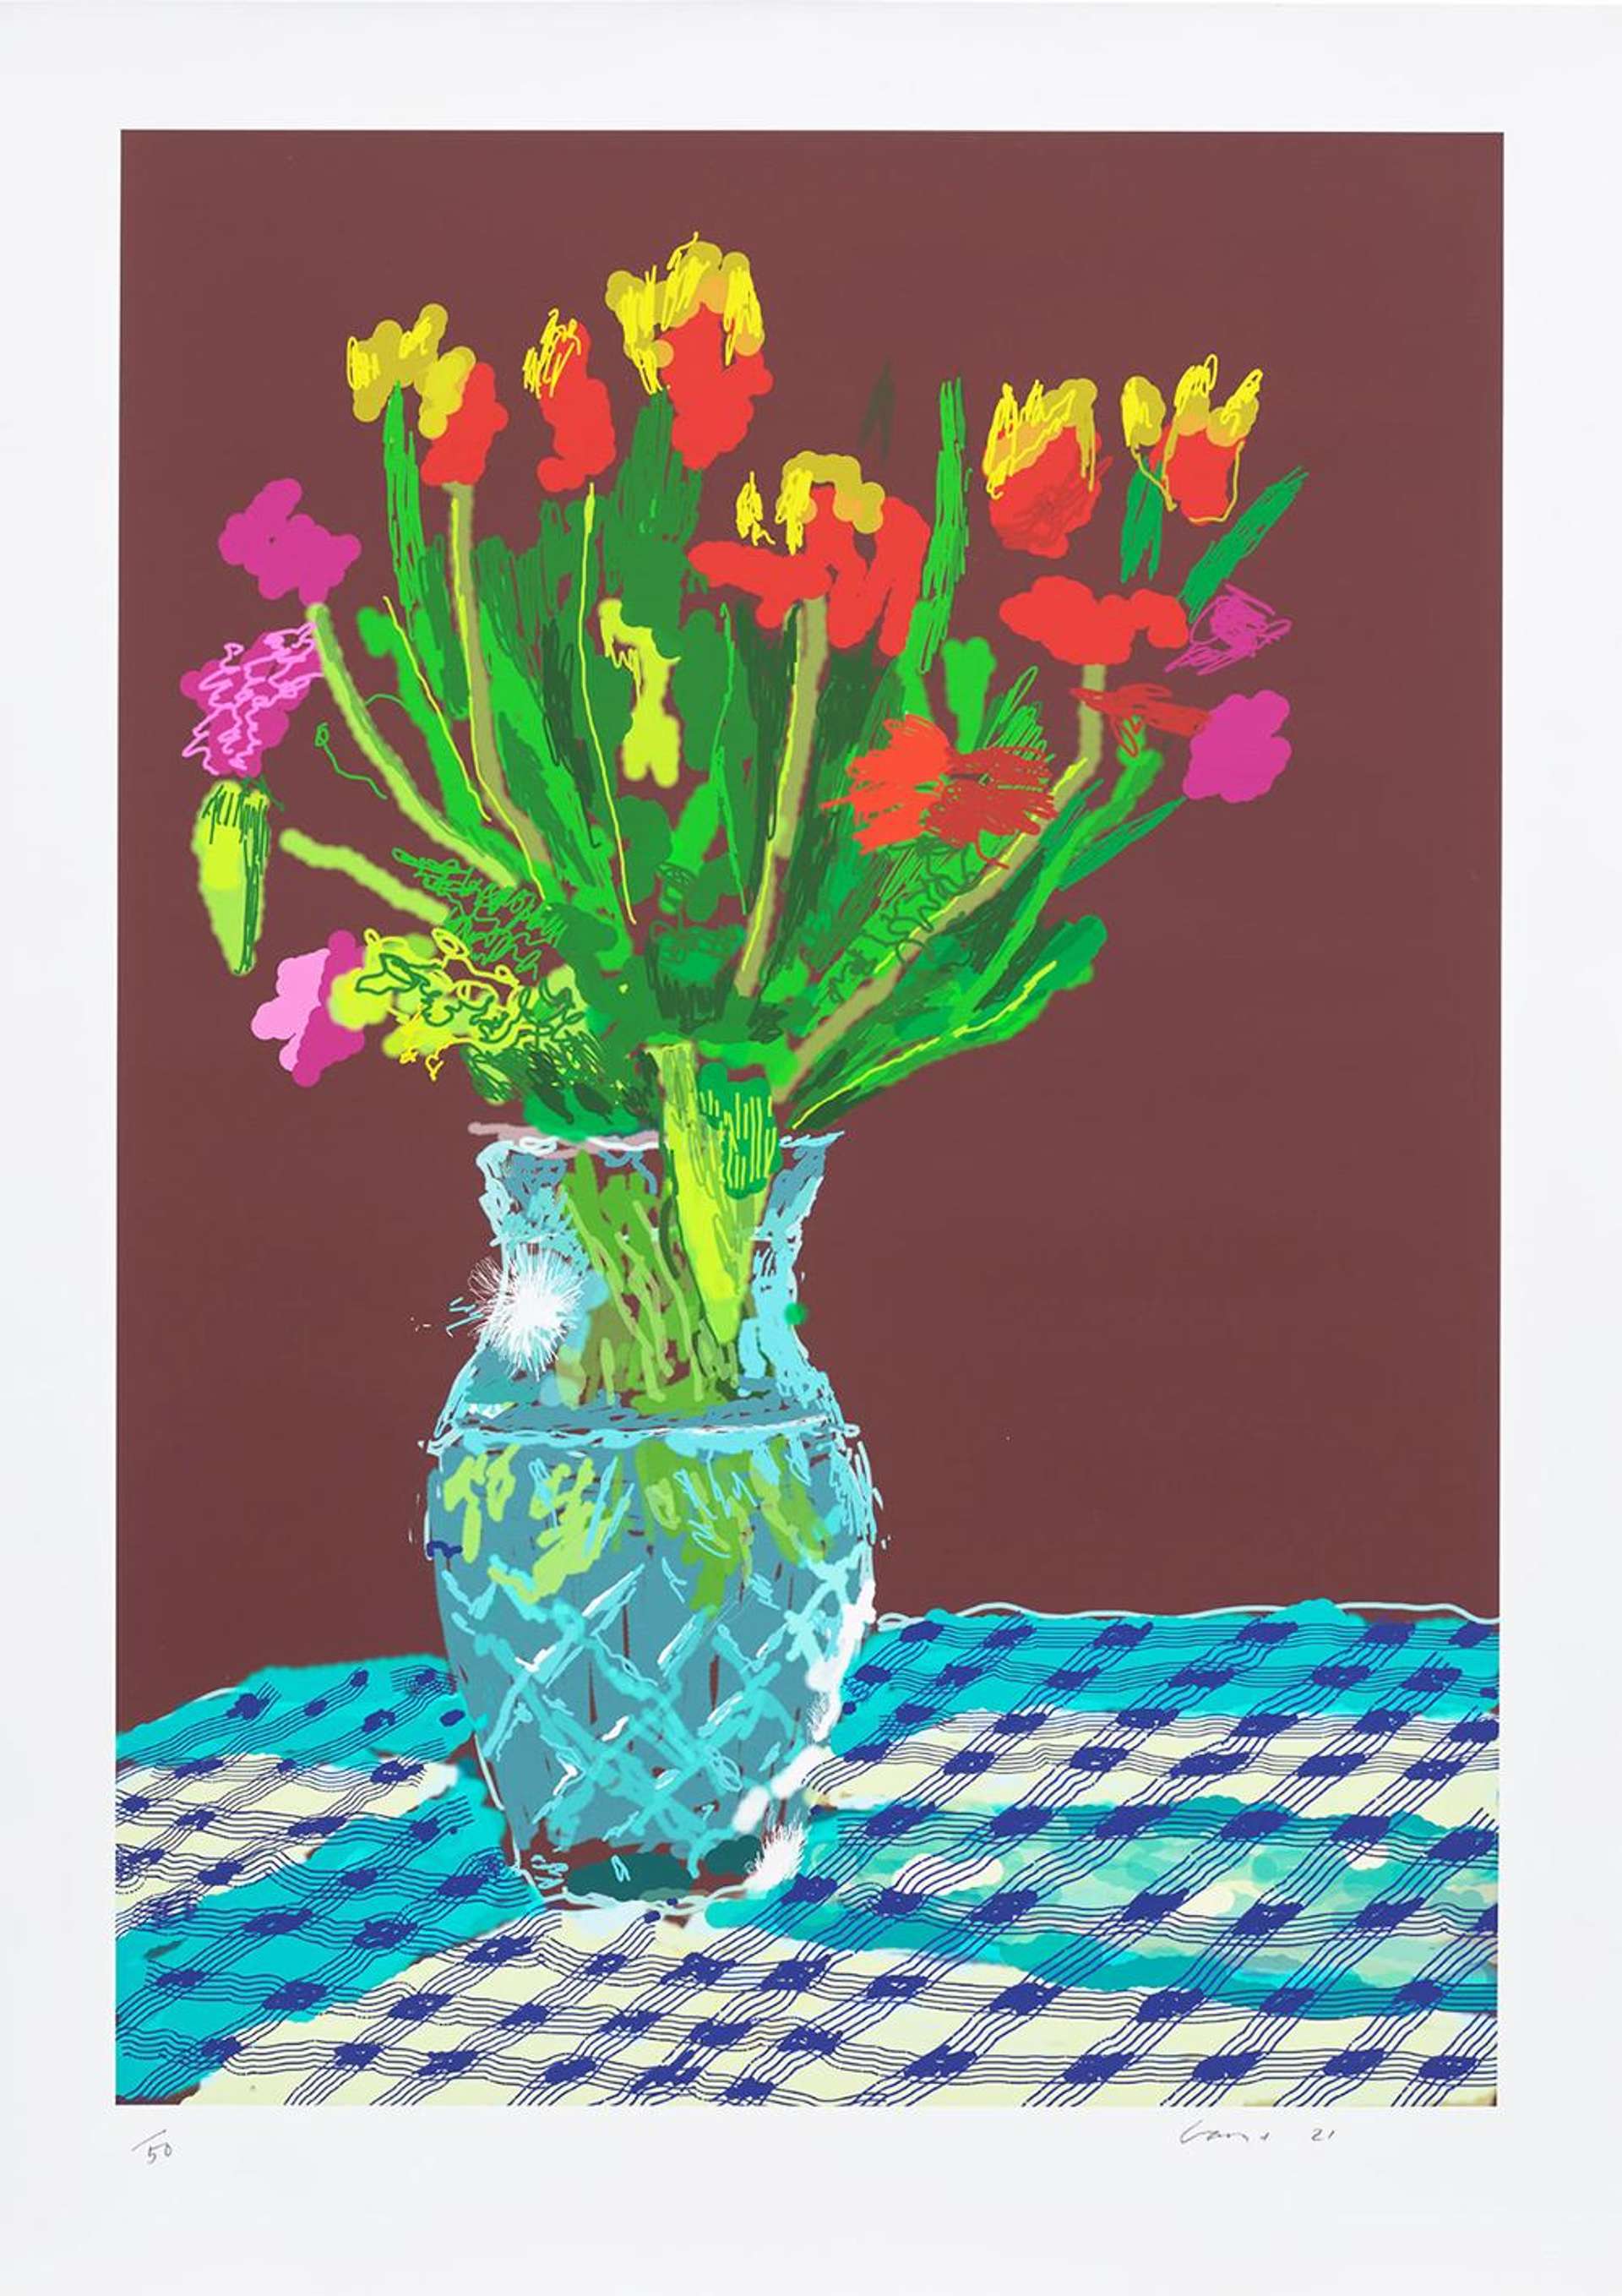 24th February 2021, Red, Yellow And Purple Flowers On A Blue Tablecloth - Signed Print by David Hockney 2021 - MyArtBroker